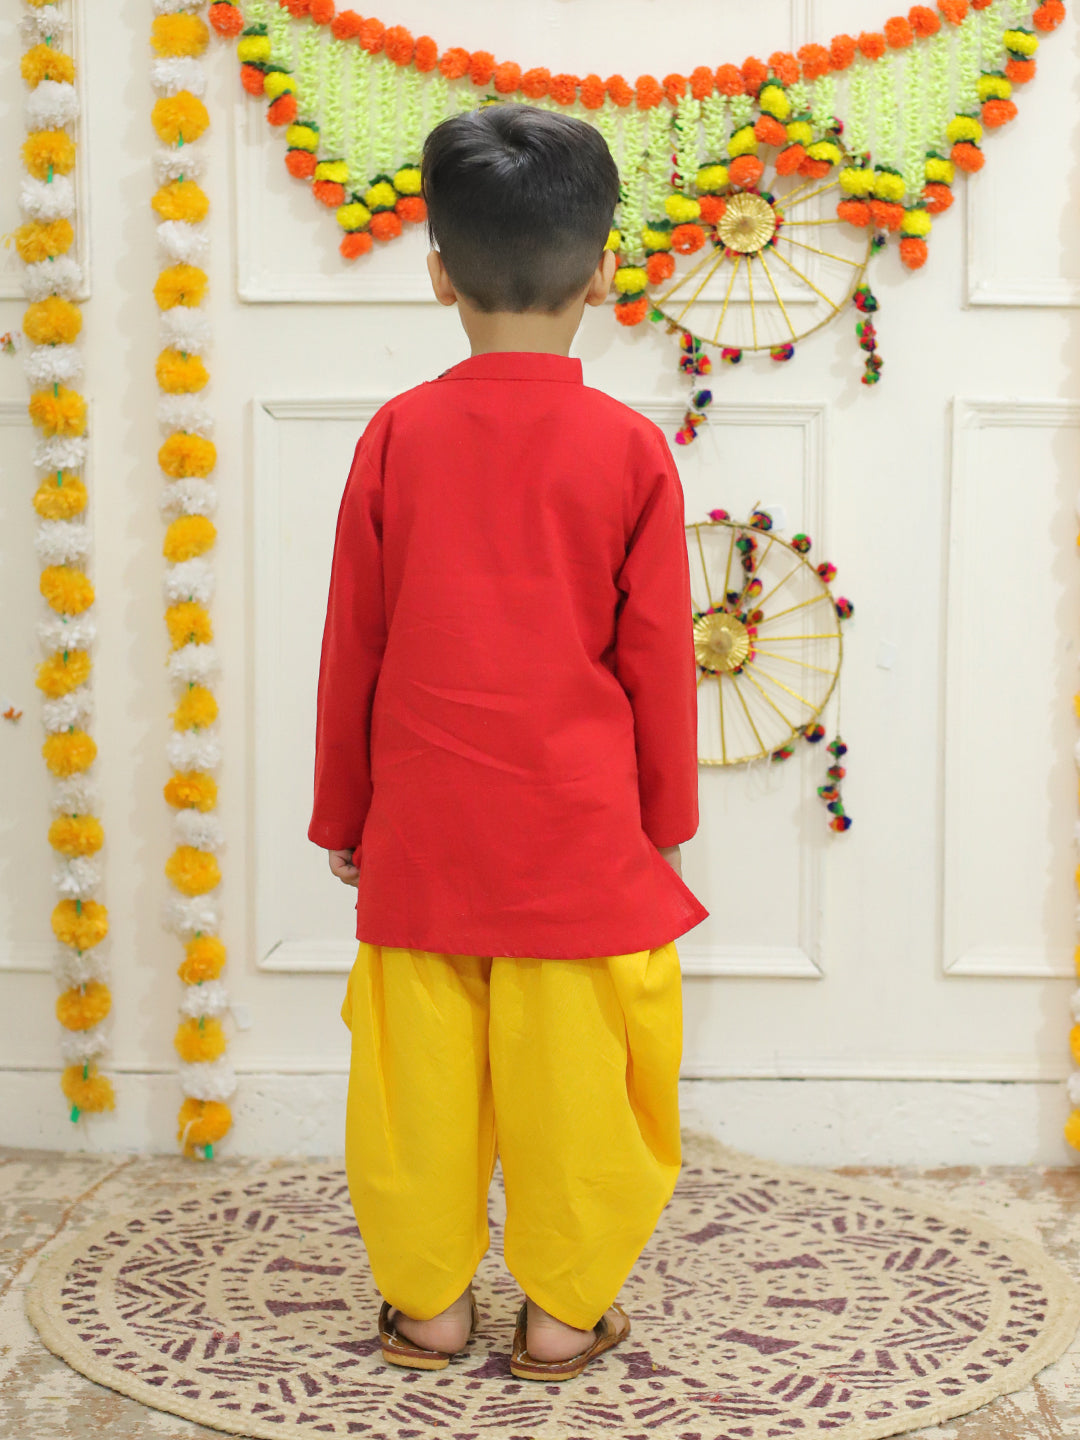 BownBee Embroidered Cotton Kurtawith Dhoti for Boys- Red with Embroidered Cotton Top with Dhoti for Girls- Red